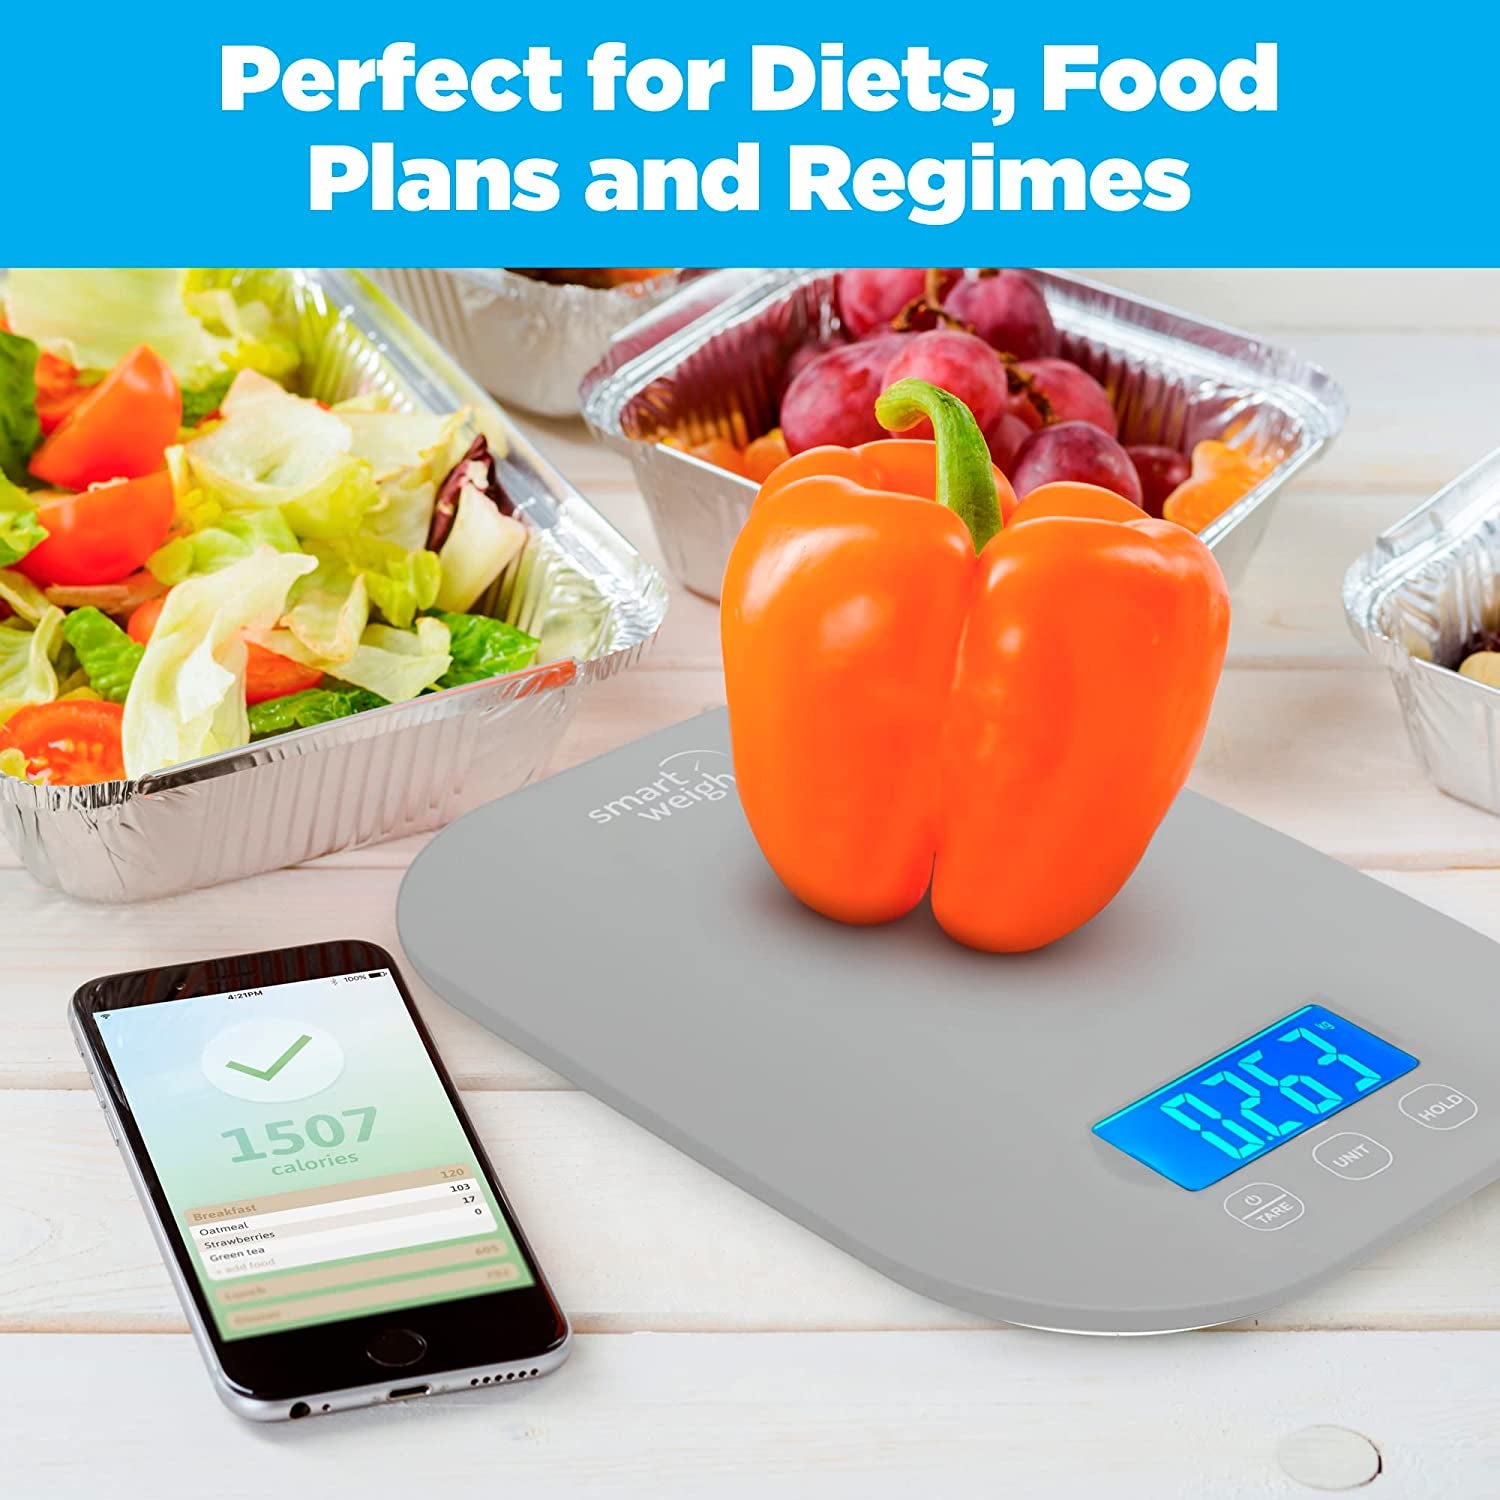 Smart Weigh 11 lb. Digital Kitchen Food Scale, Mechanical Accurate Weight Scale with 5-Unit Modes, Grams and Ounces for Weight Loss,Weighing Ingredients, Dieting, Keto Cooking , Meal Prep and Baking